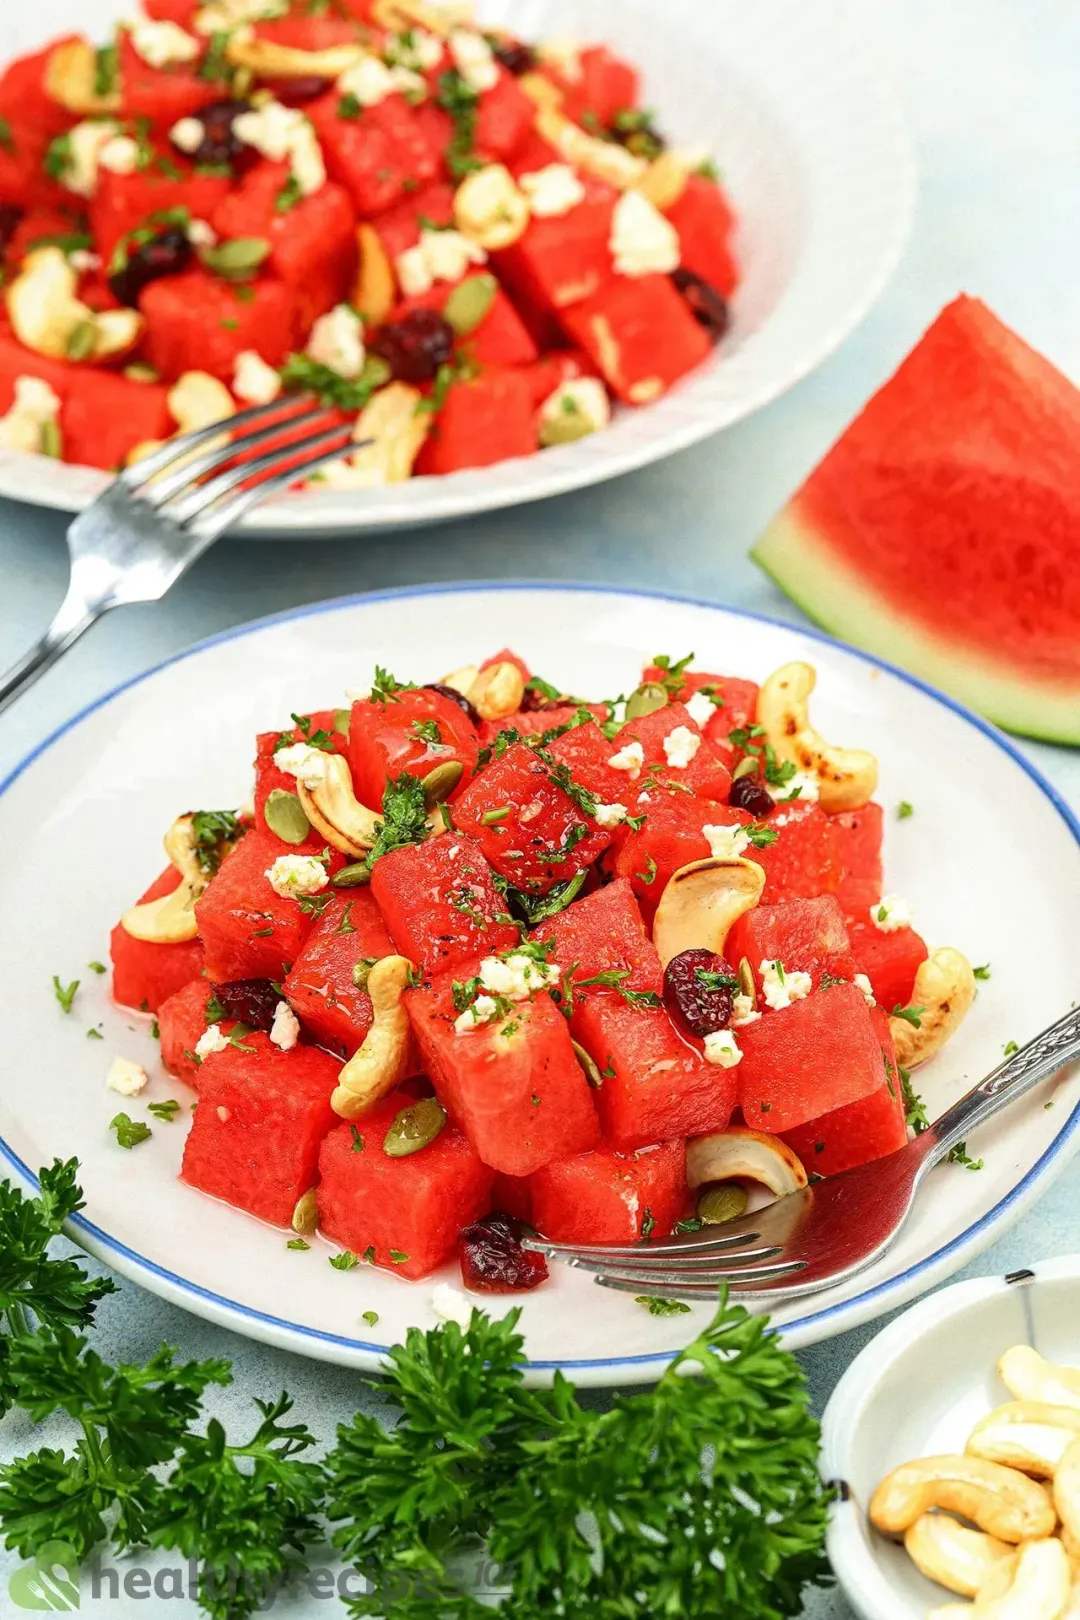 How to Pick a Watermelon for watermelon salad